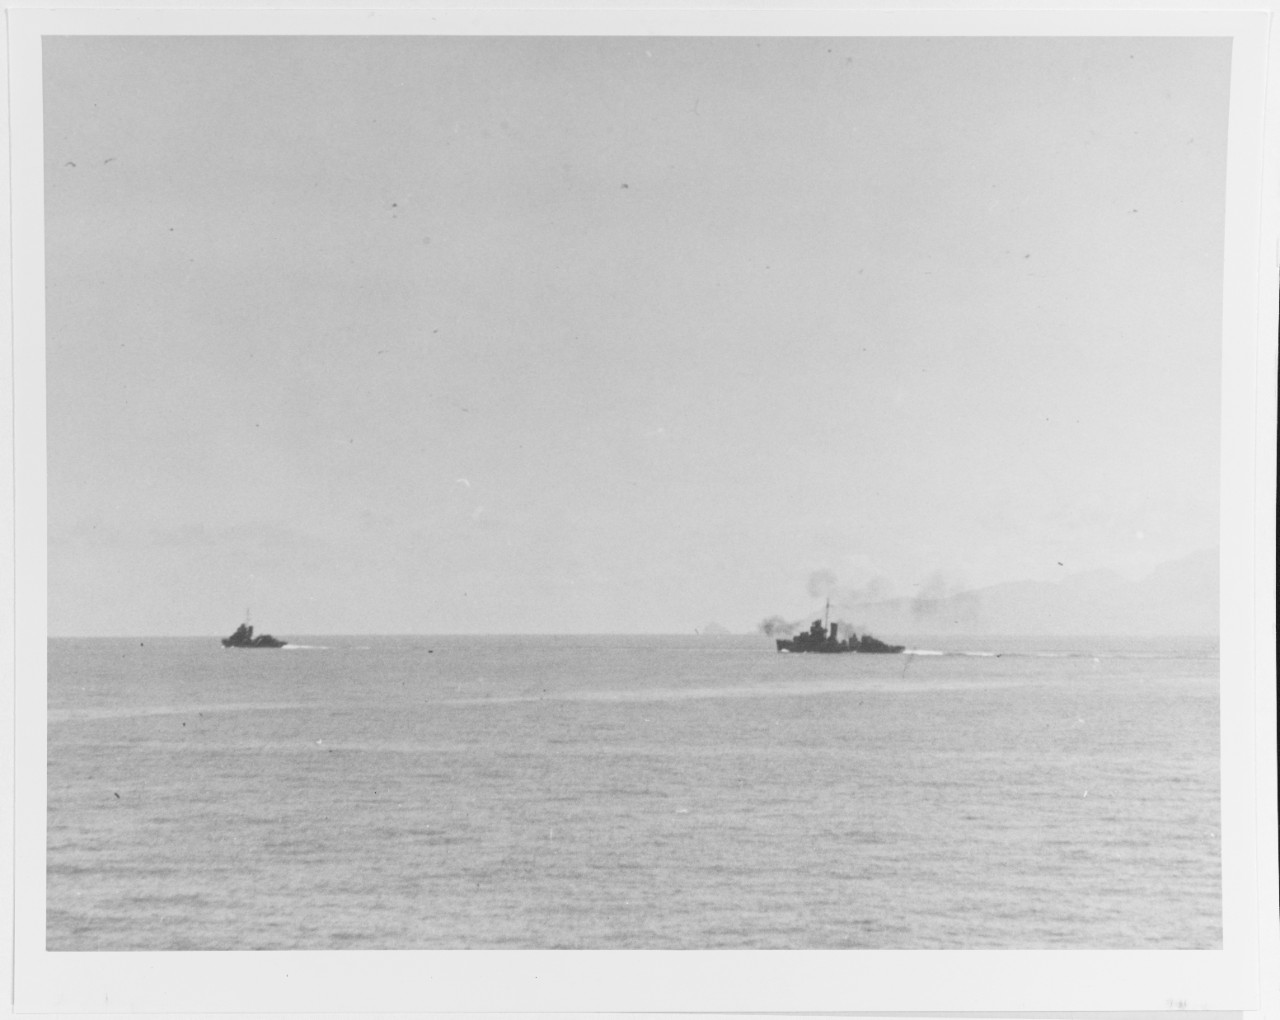 Photo #: 80-G-32149  Ships of Destroyer Squadron Four